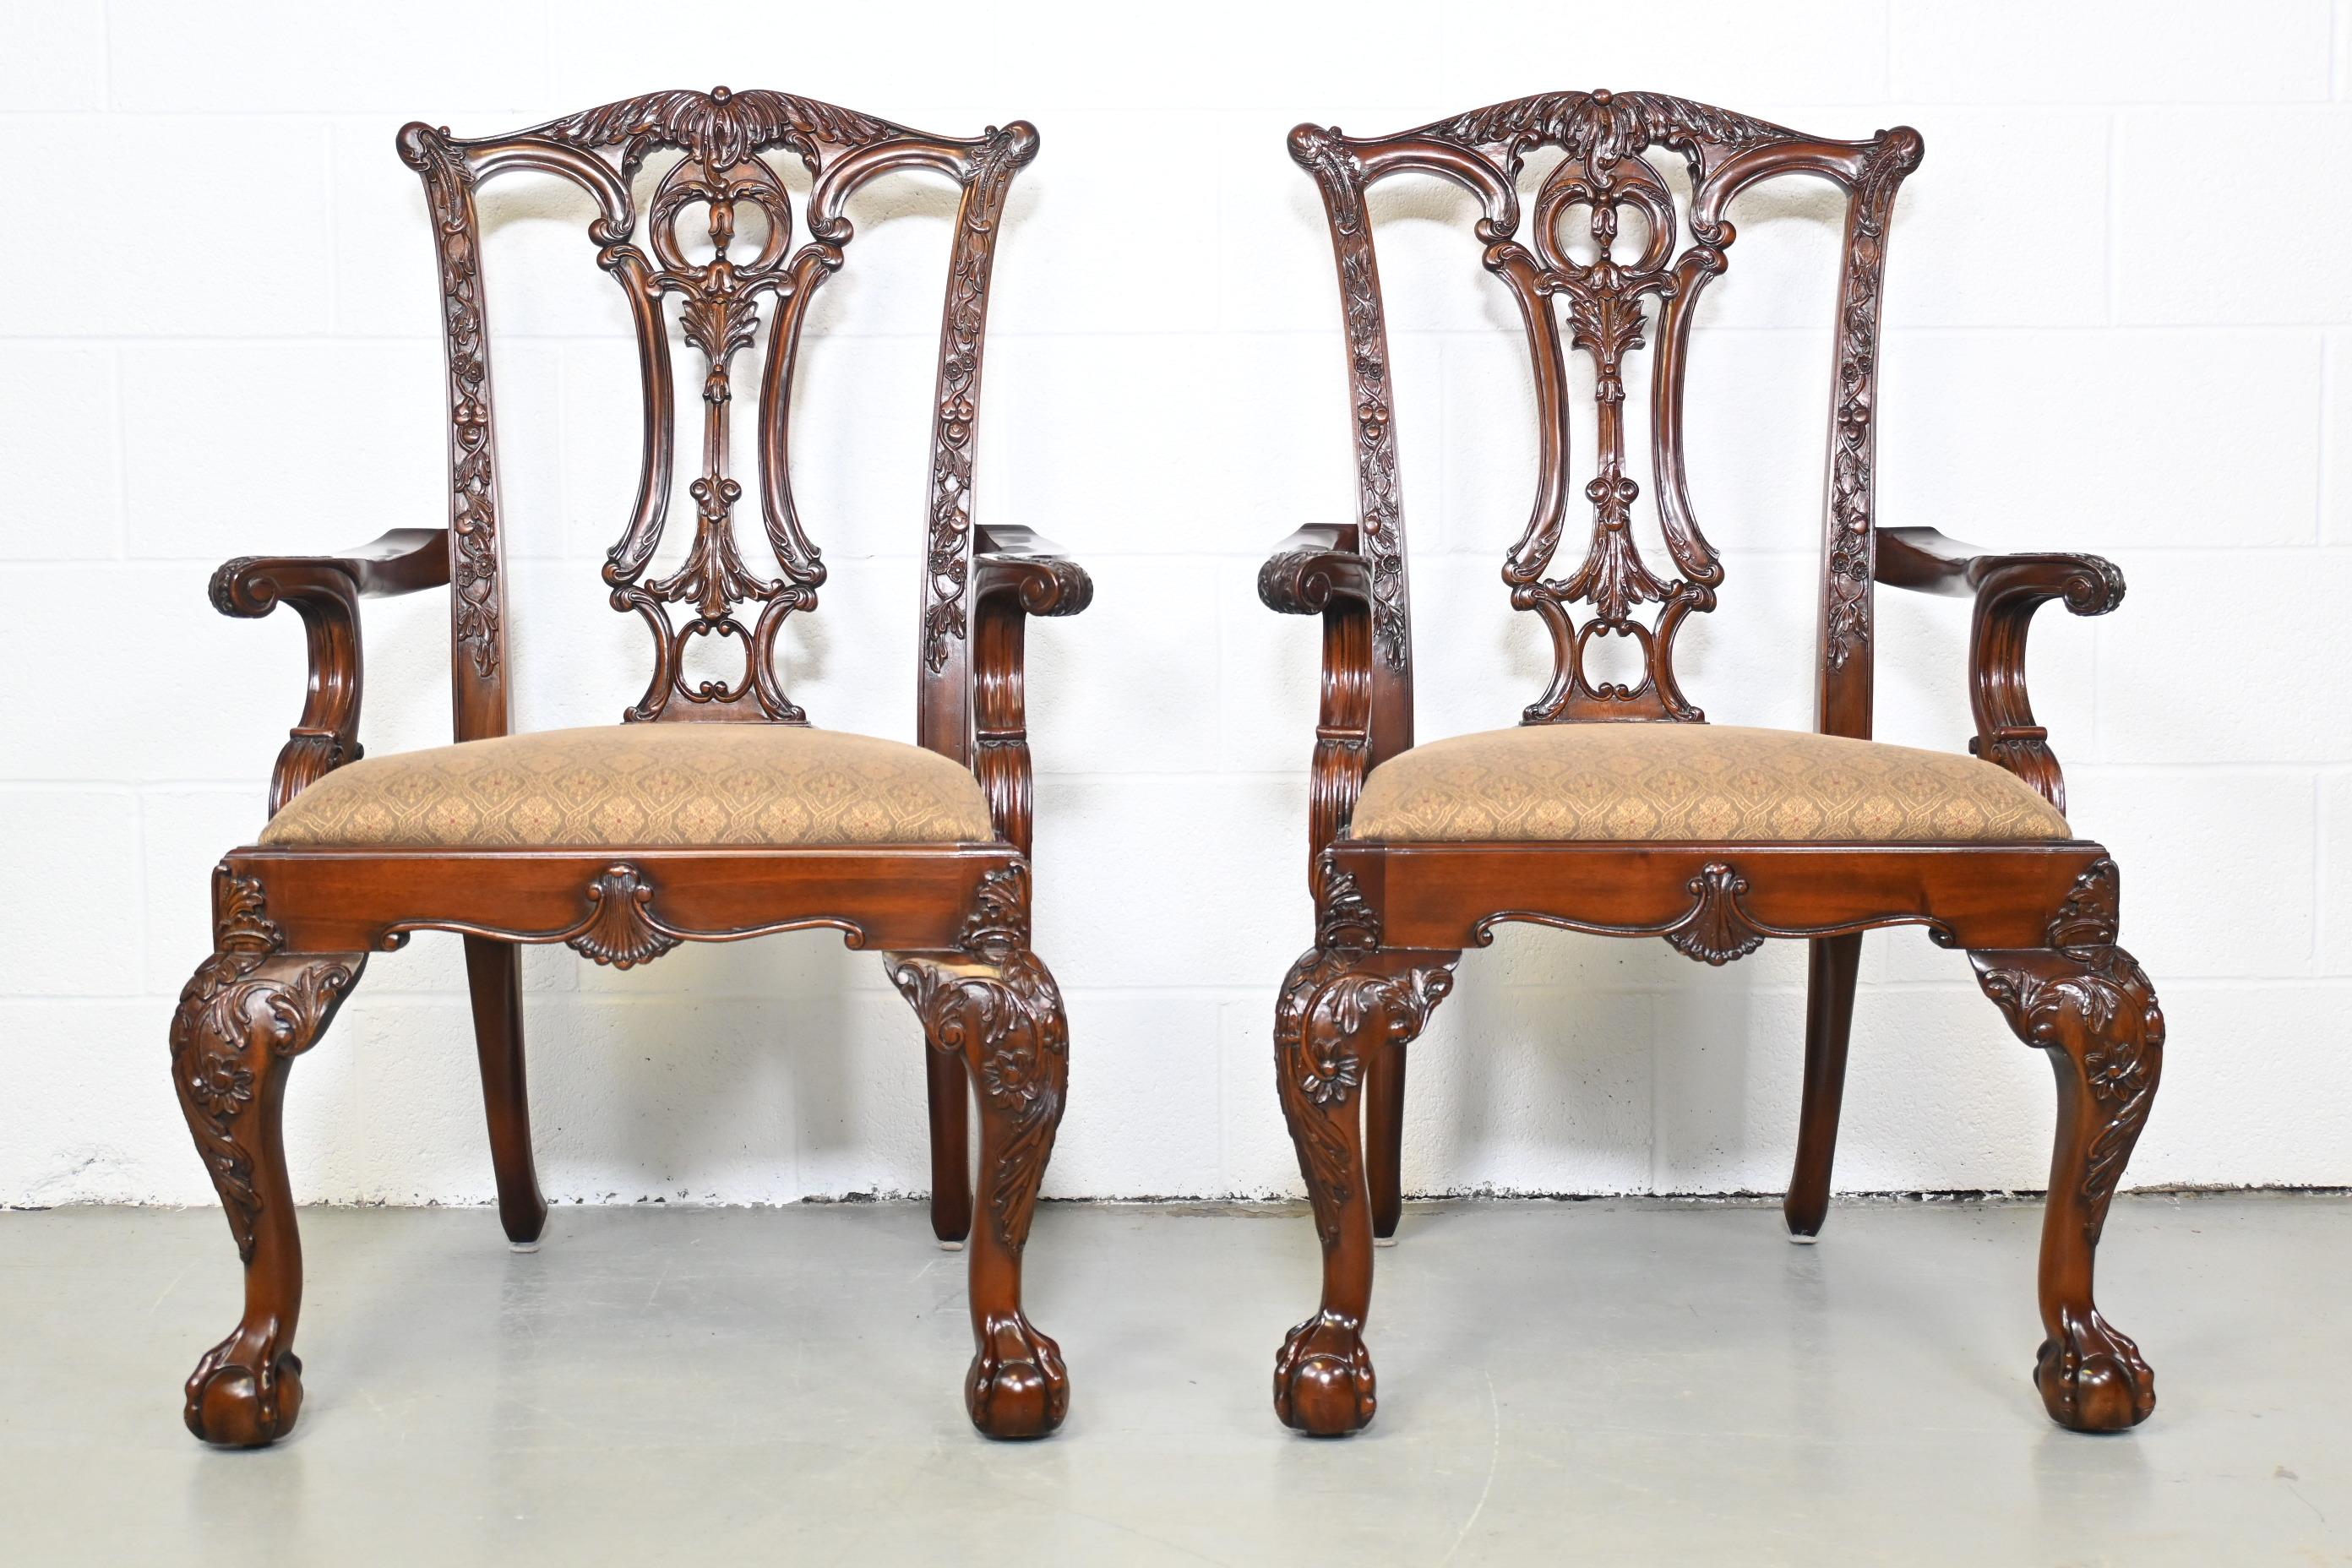 Drexel Heritage French Chippendale Pair of Arm Chairs

Drexel Heritage, 2000s

Measures: 22.5 Wide x 18.5 Deep x 40 High. Seat Height 18.5.

Pair of ornately carved french chippendale traditional arm chairs with cloth upholstery.

Great